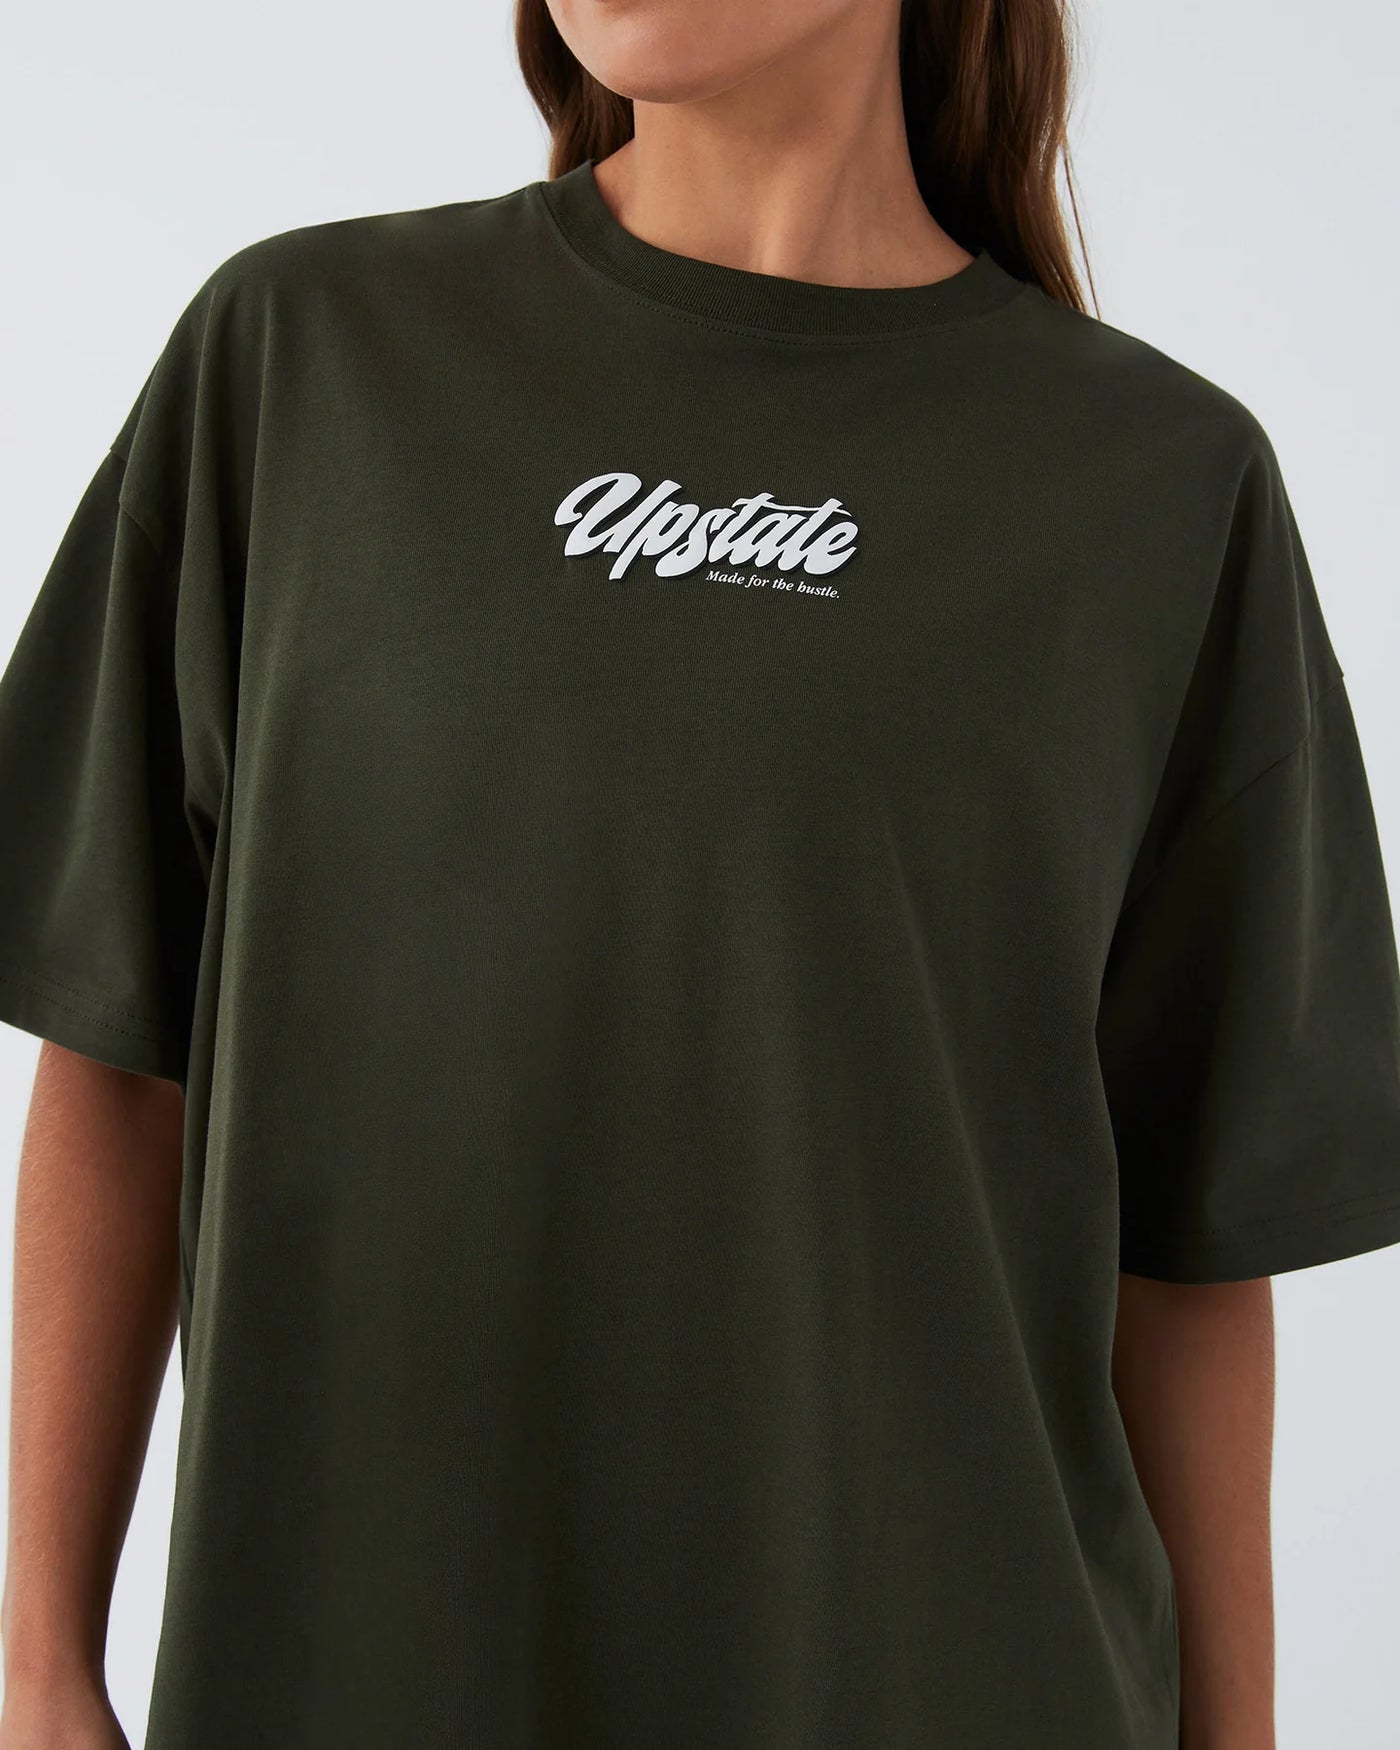 Hussle Tee - Moss / Upstate Made for the Hussle